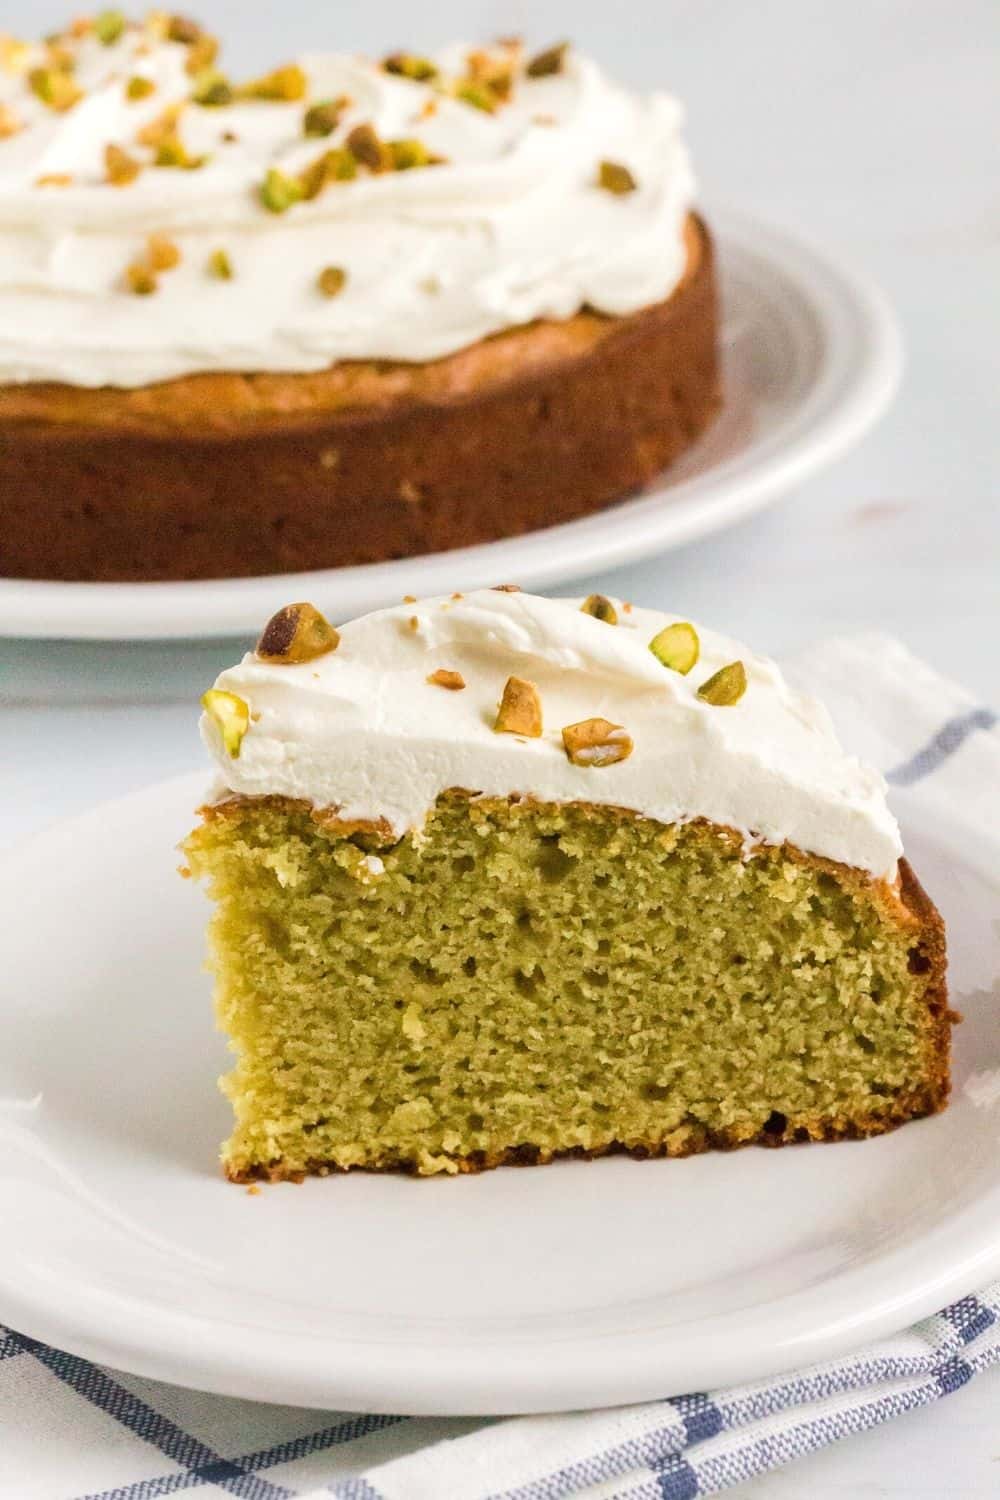 slice of pistachio cake made from scratch and topped with frosting, served on a white plate with the remainder of the single layer cake in the background